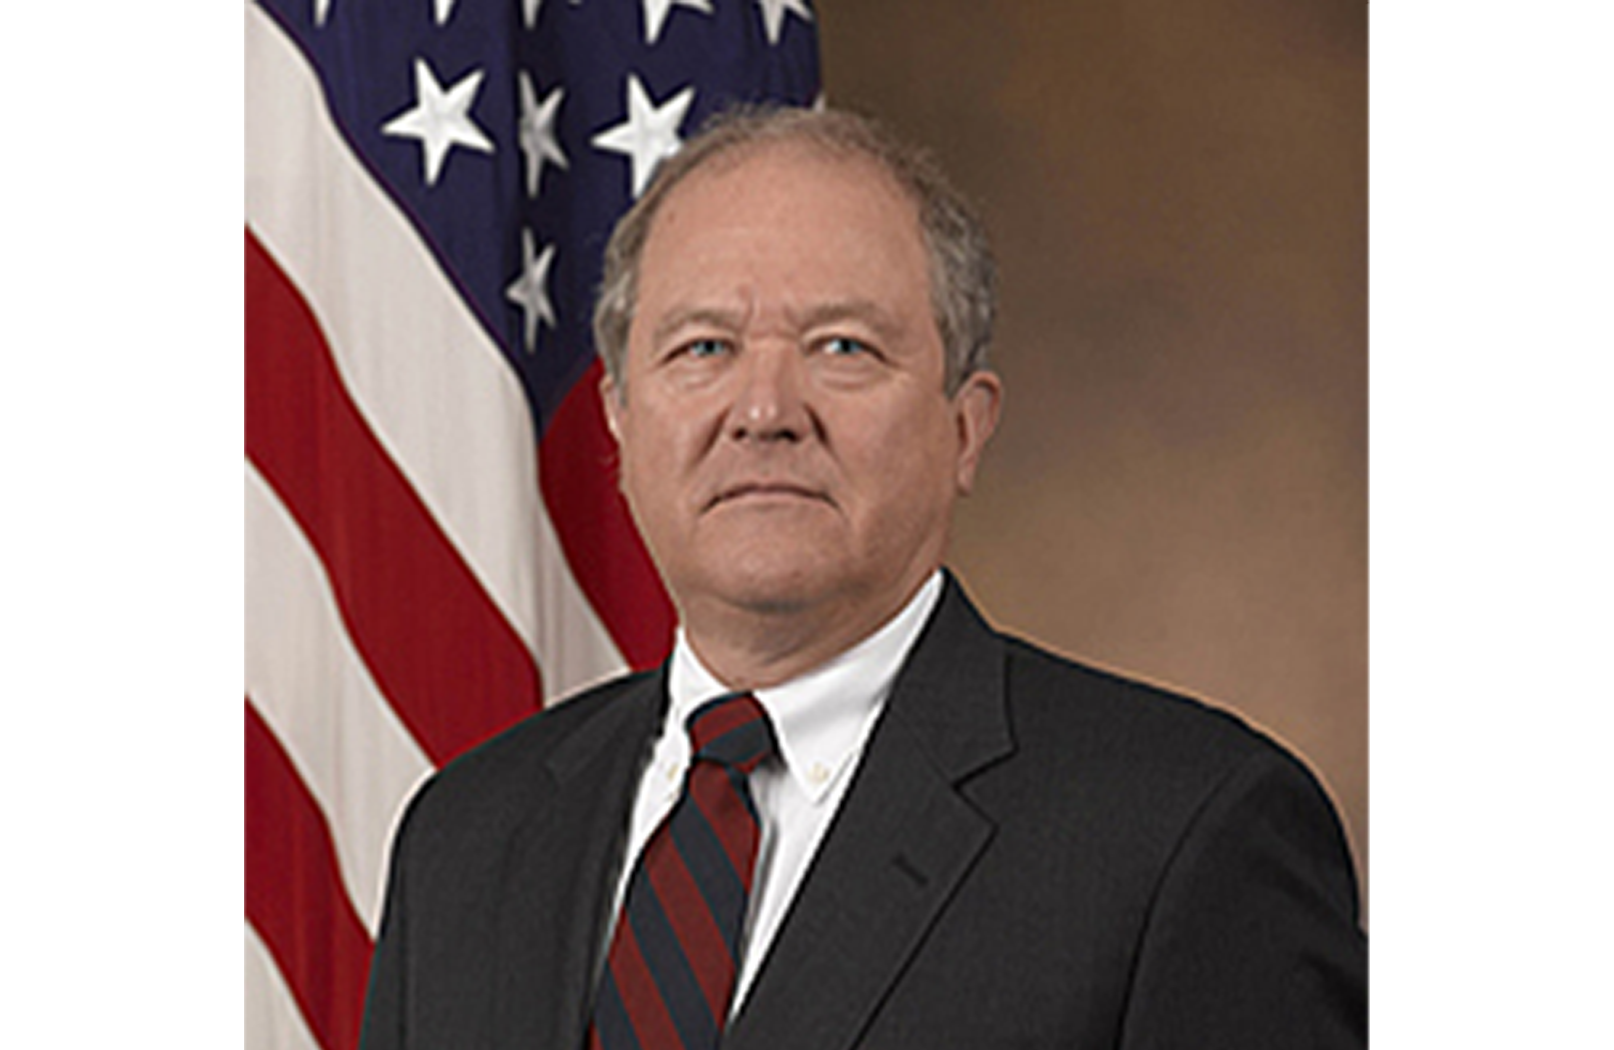 <p>Remarks of <strong>John F. Sopko</strong> Special Inspector General for Afghanistan Reconstruction</p>

<p>&ldquo;Remarks to the AISS conference on &lsquo;<strong>Reimagining Afghanistan: Ways Forward</strong>&rsquo;&rdquo;&nbsp;</p>